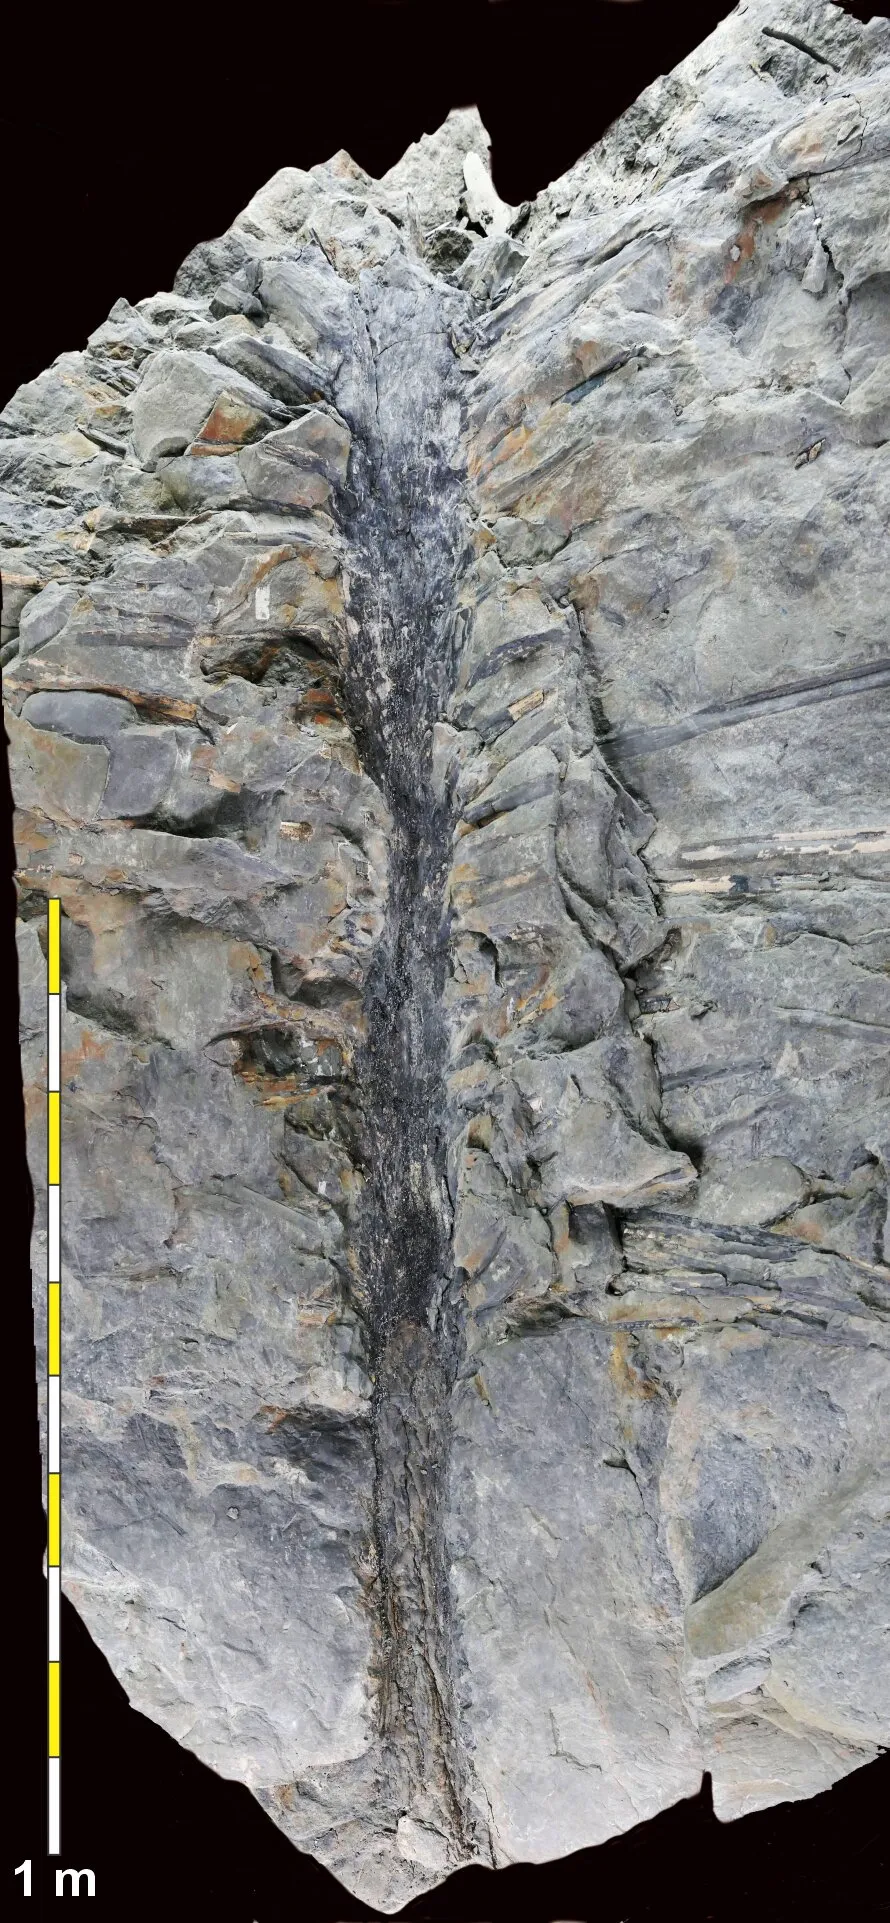 A 350 million-year-old fossil of a tree, pressed into grey stone, with a one-meter measurement for scale.